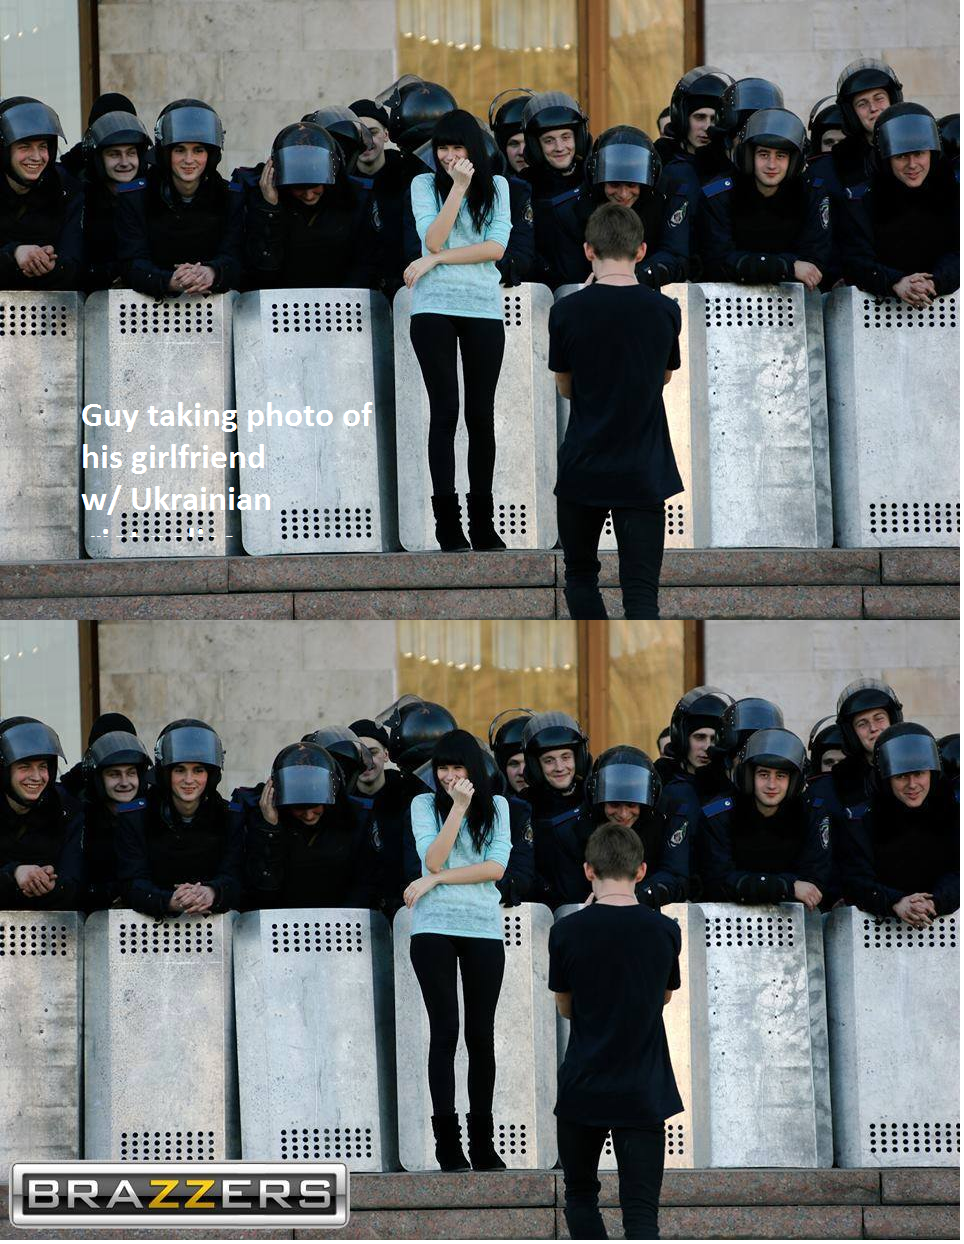 it is always on the right side..oh well..(the text is"with ukrainian riot police")